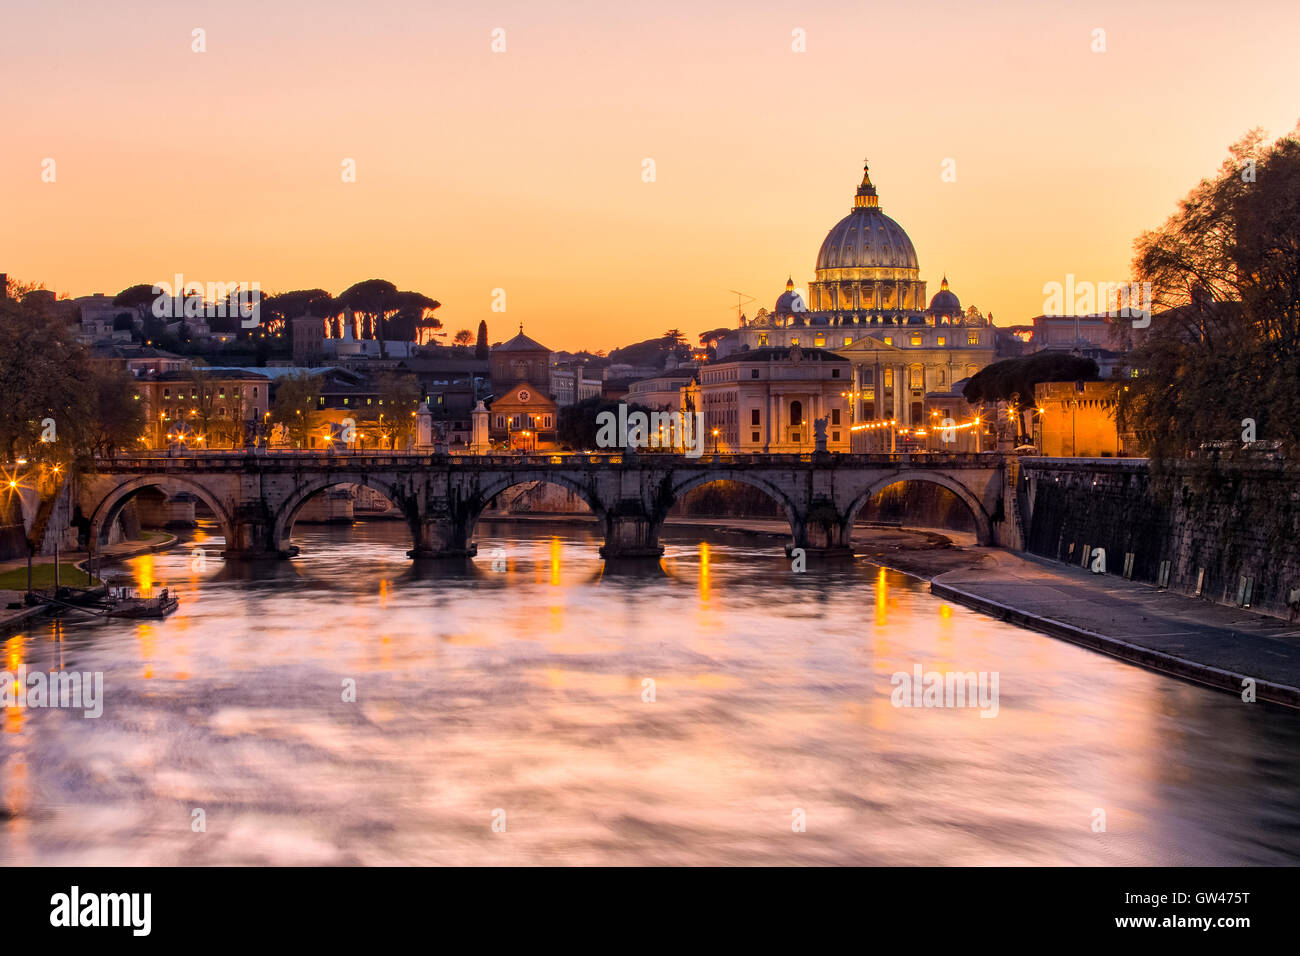 Sunset view of the Vatican city state. Stock Photo